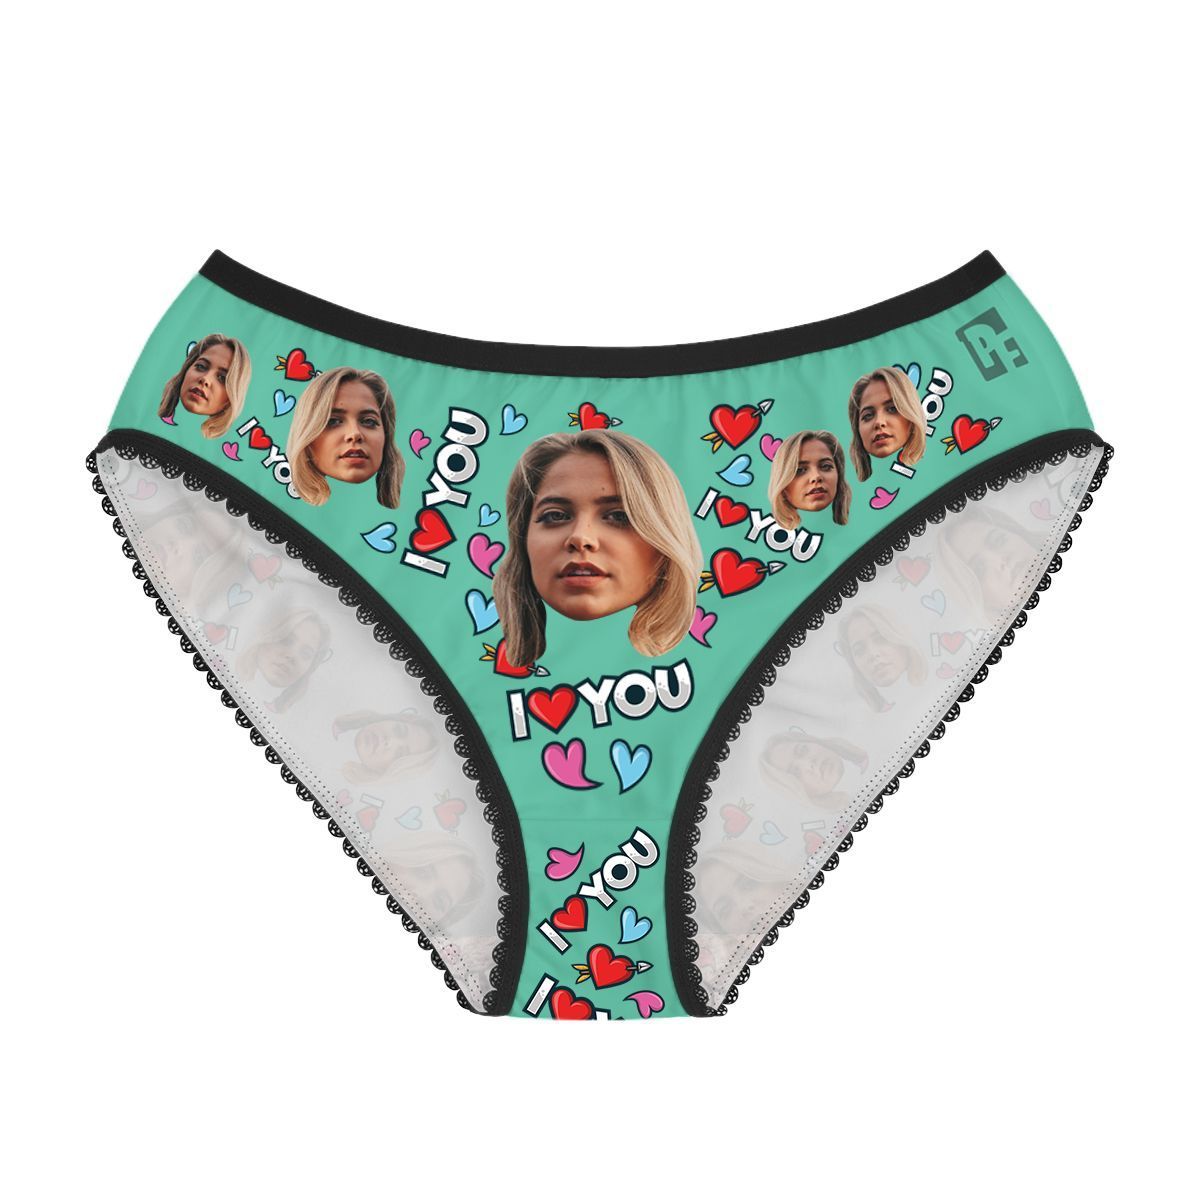 Mint Love you women's underwear briefs personalized with photo printed on them